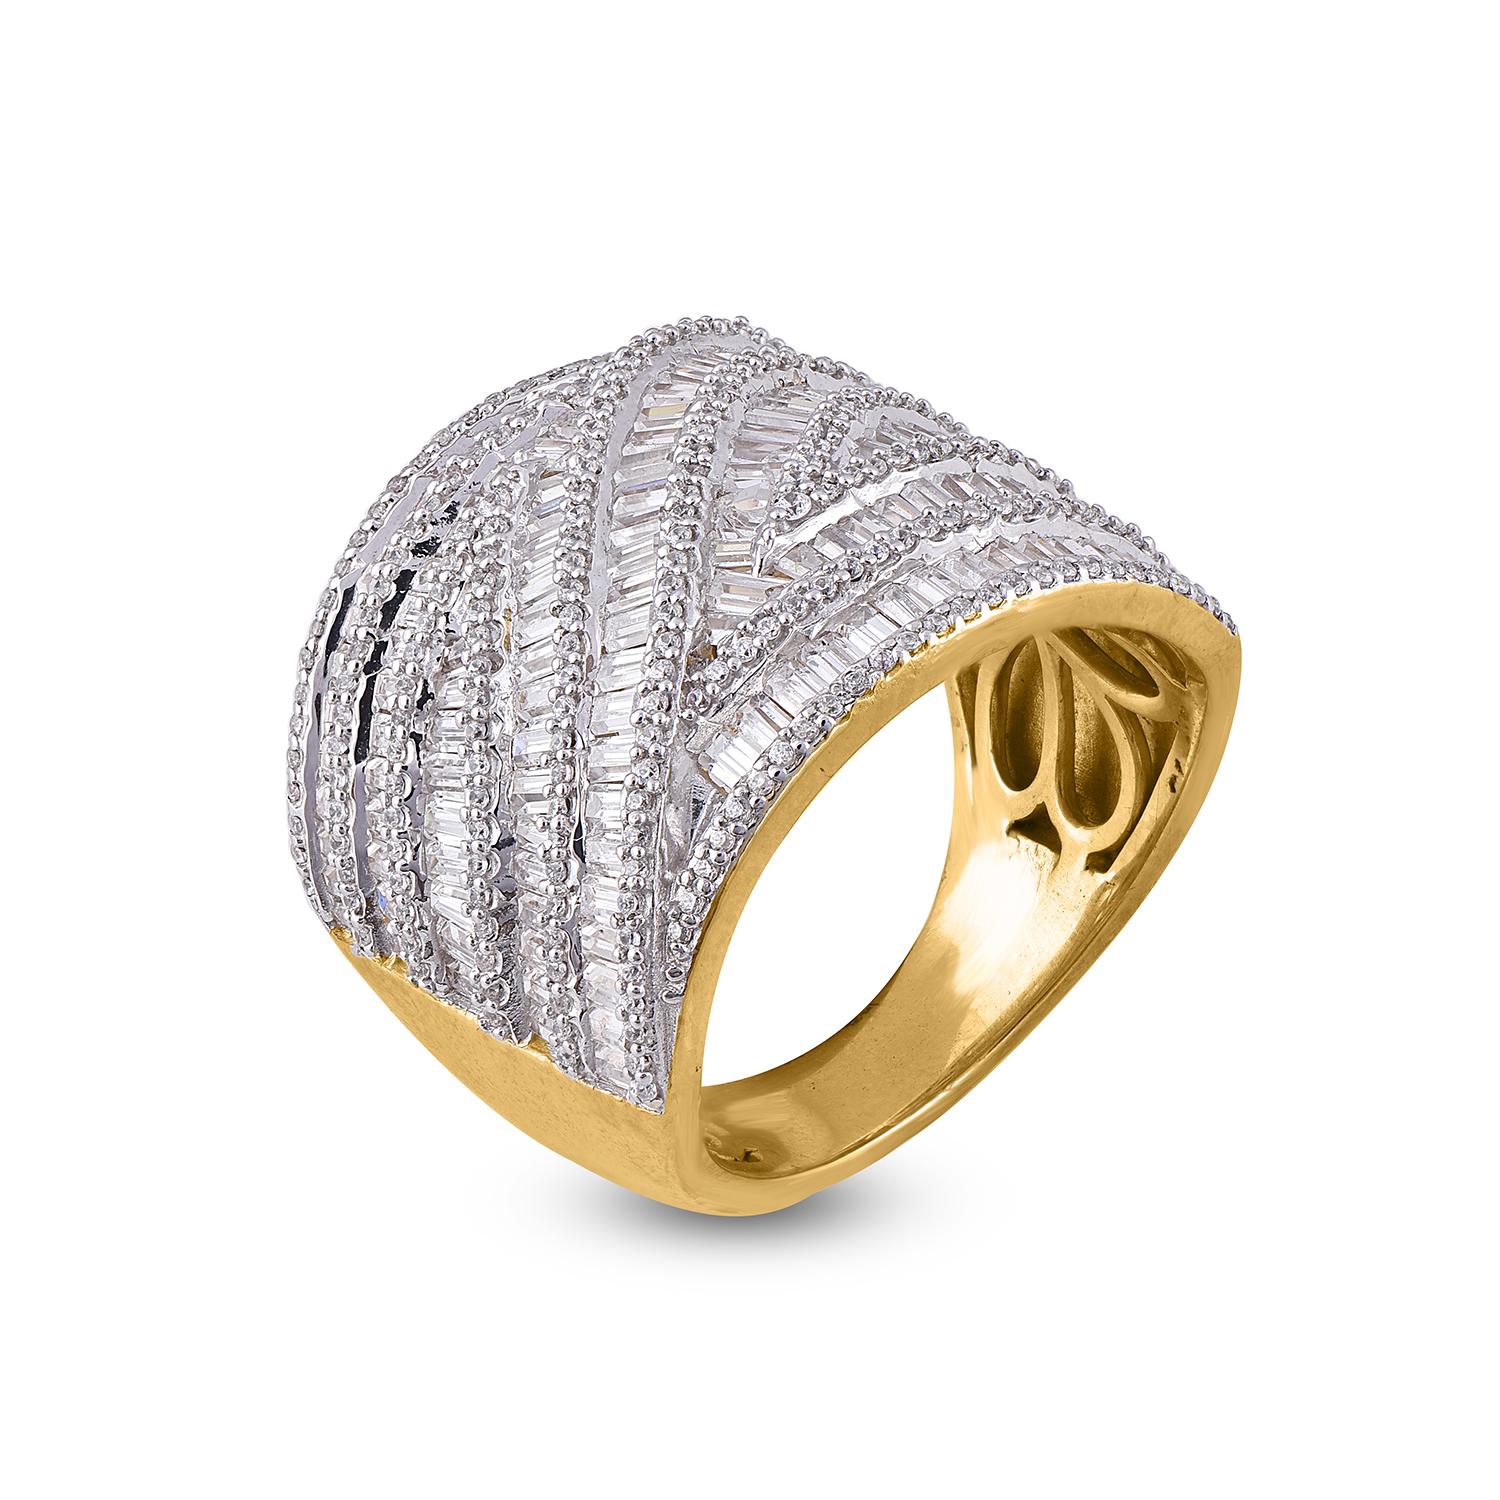 Elegant and Glamorous, this multi row wedding band ring is perfect for your evening ensemble. The ring is crafted from 14 karat gold in your choice of white, rose, or yellow, and features 242 round and 139 Baguette cut diamond set in prong and